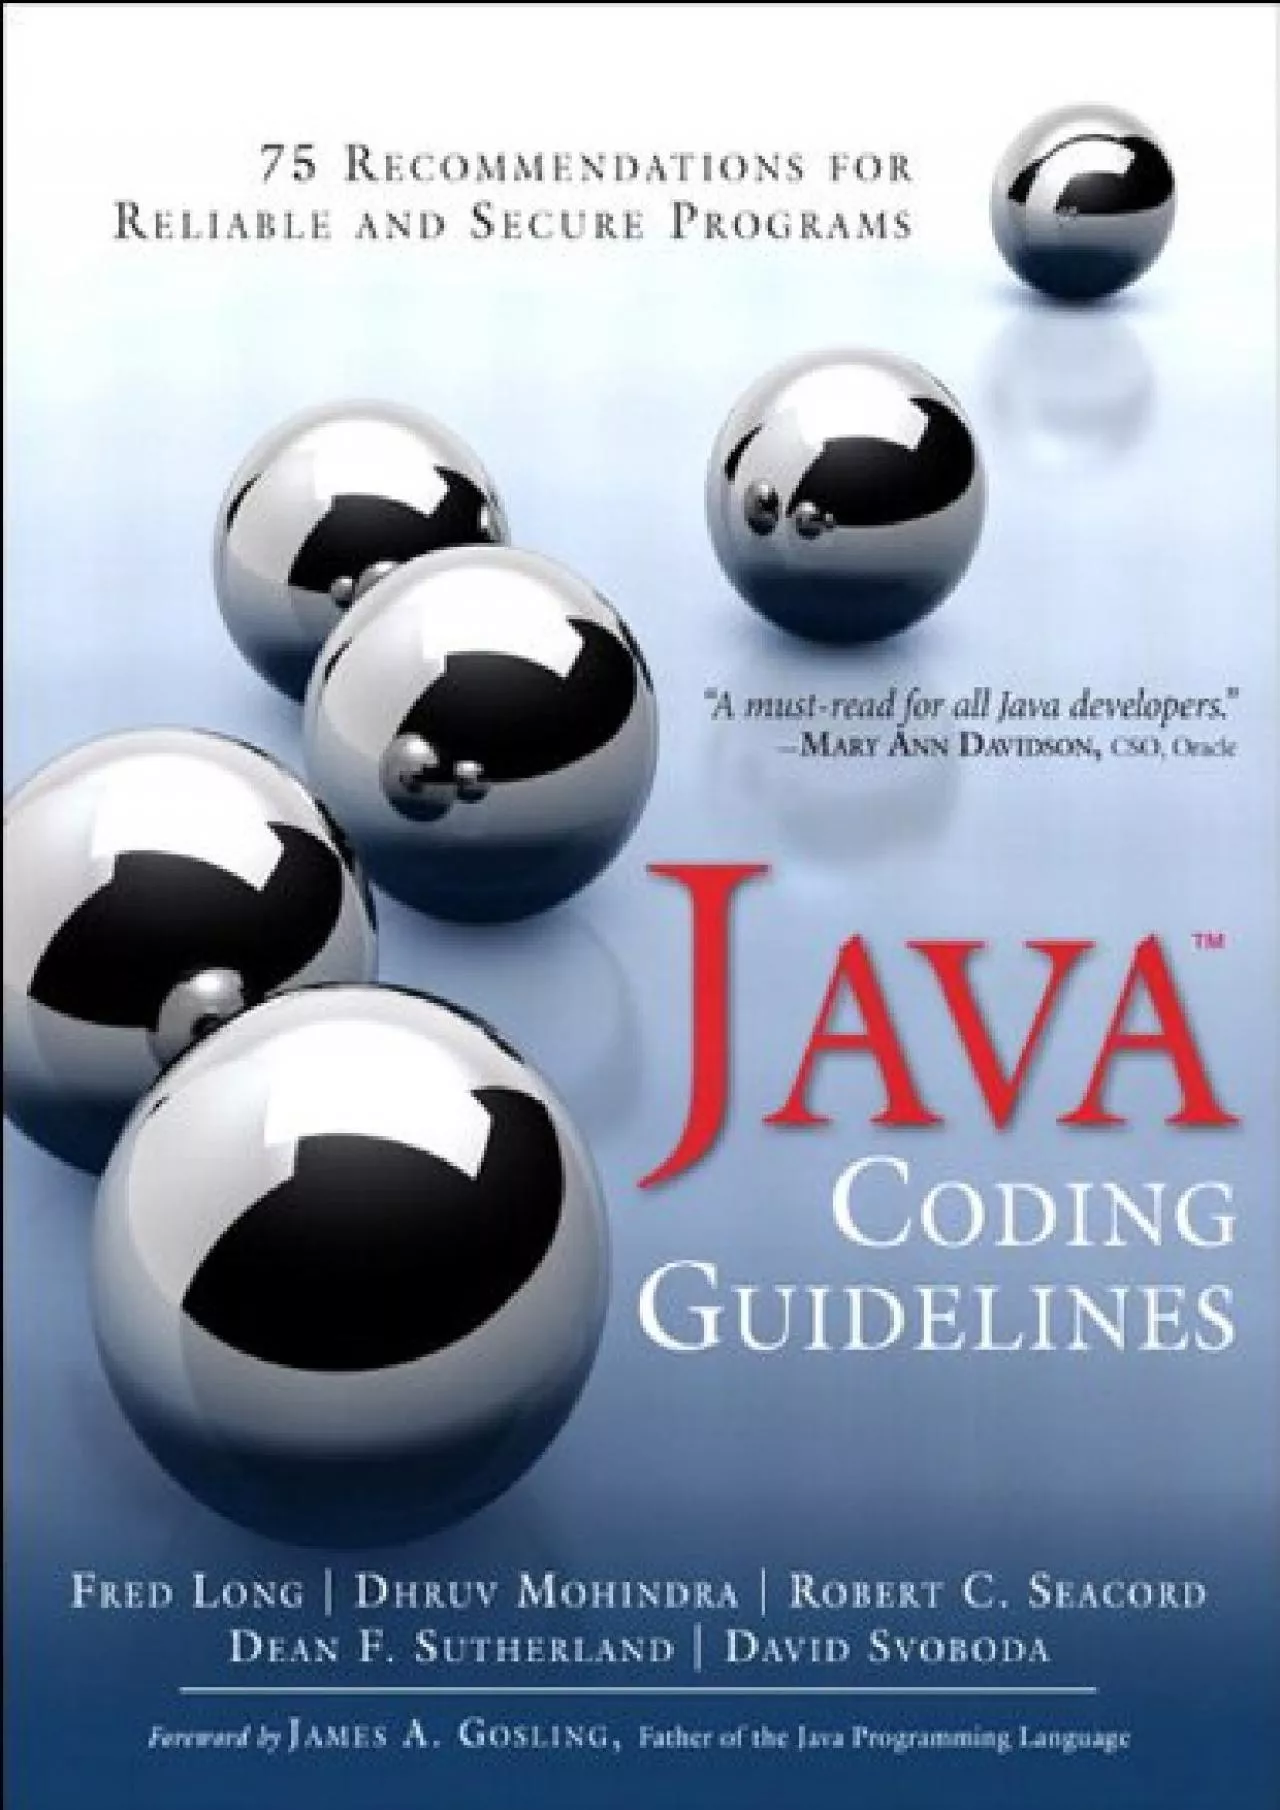 [BEST]-Java Coding Guidelines: 75 Recommendations for Reliable and Secure Programs (SEI